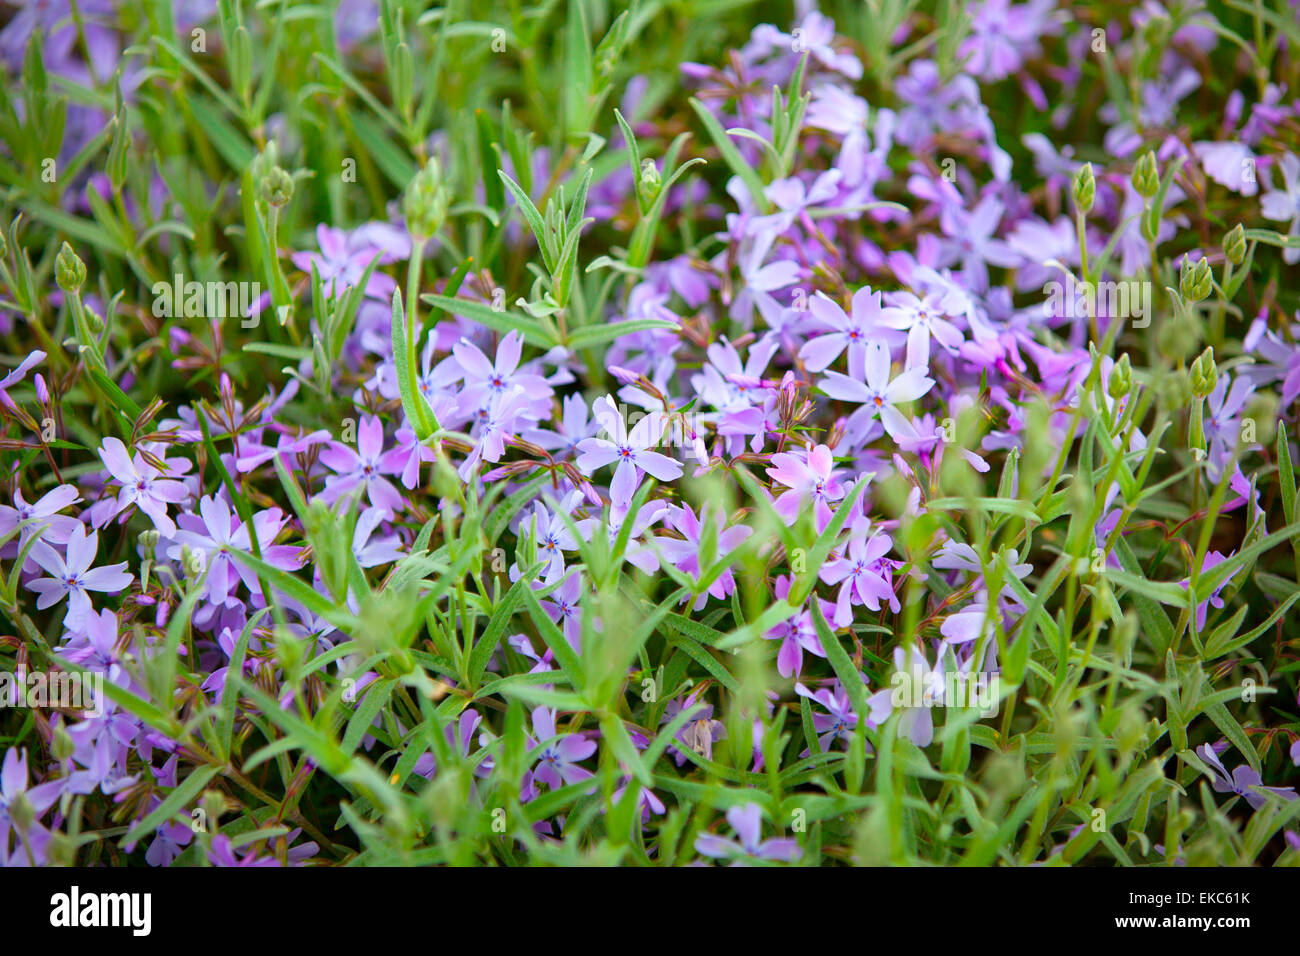 flower bed with blooming scilla flowers (Chionodoxa sardensis) Stock Photo